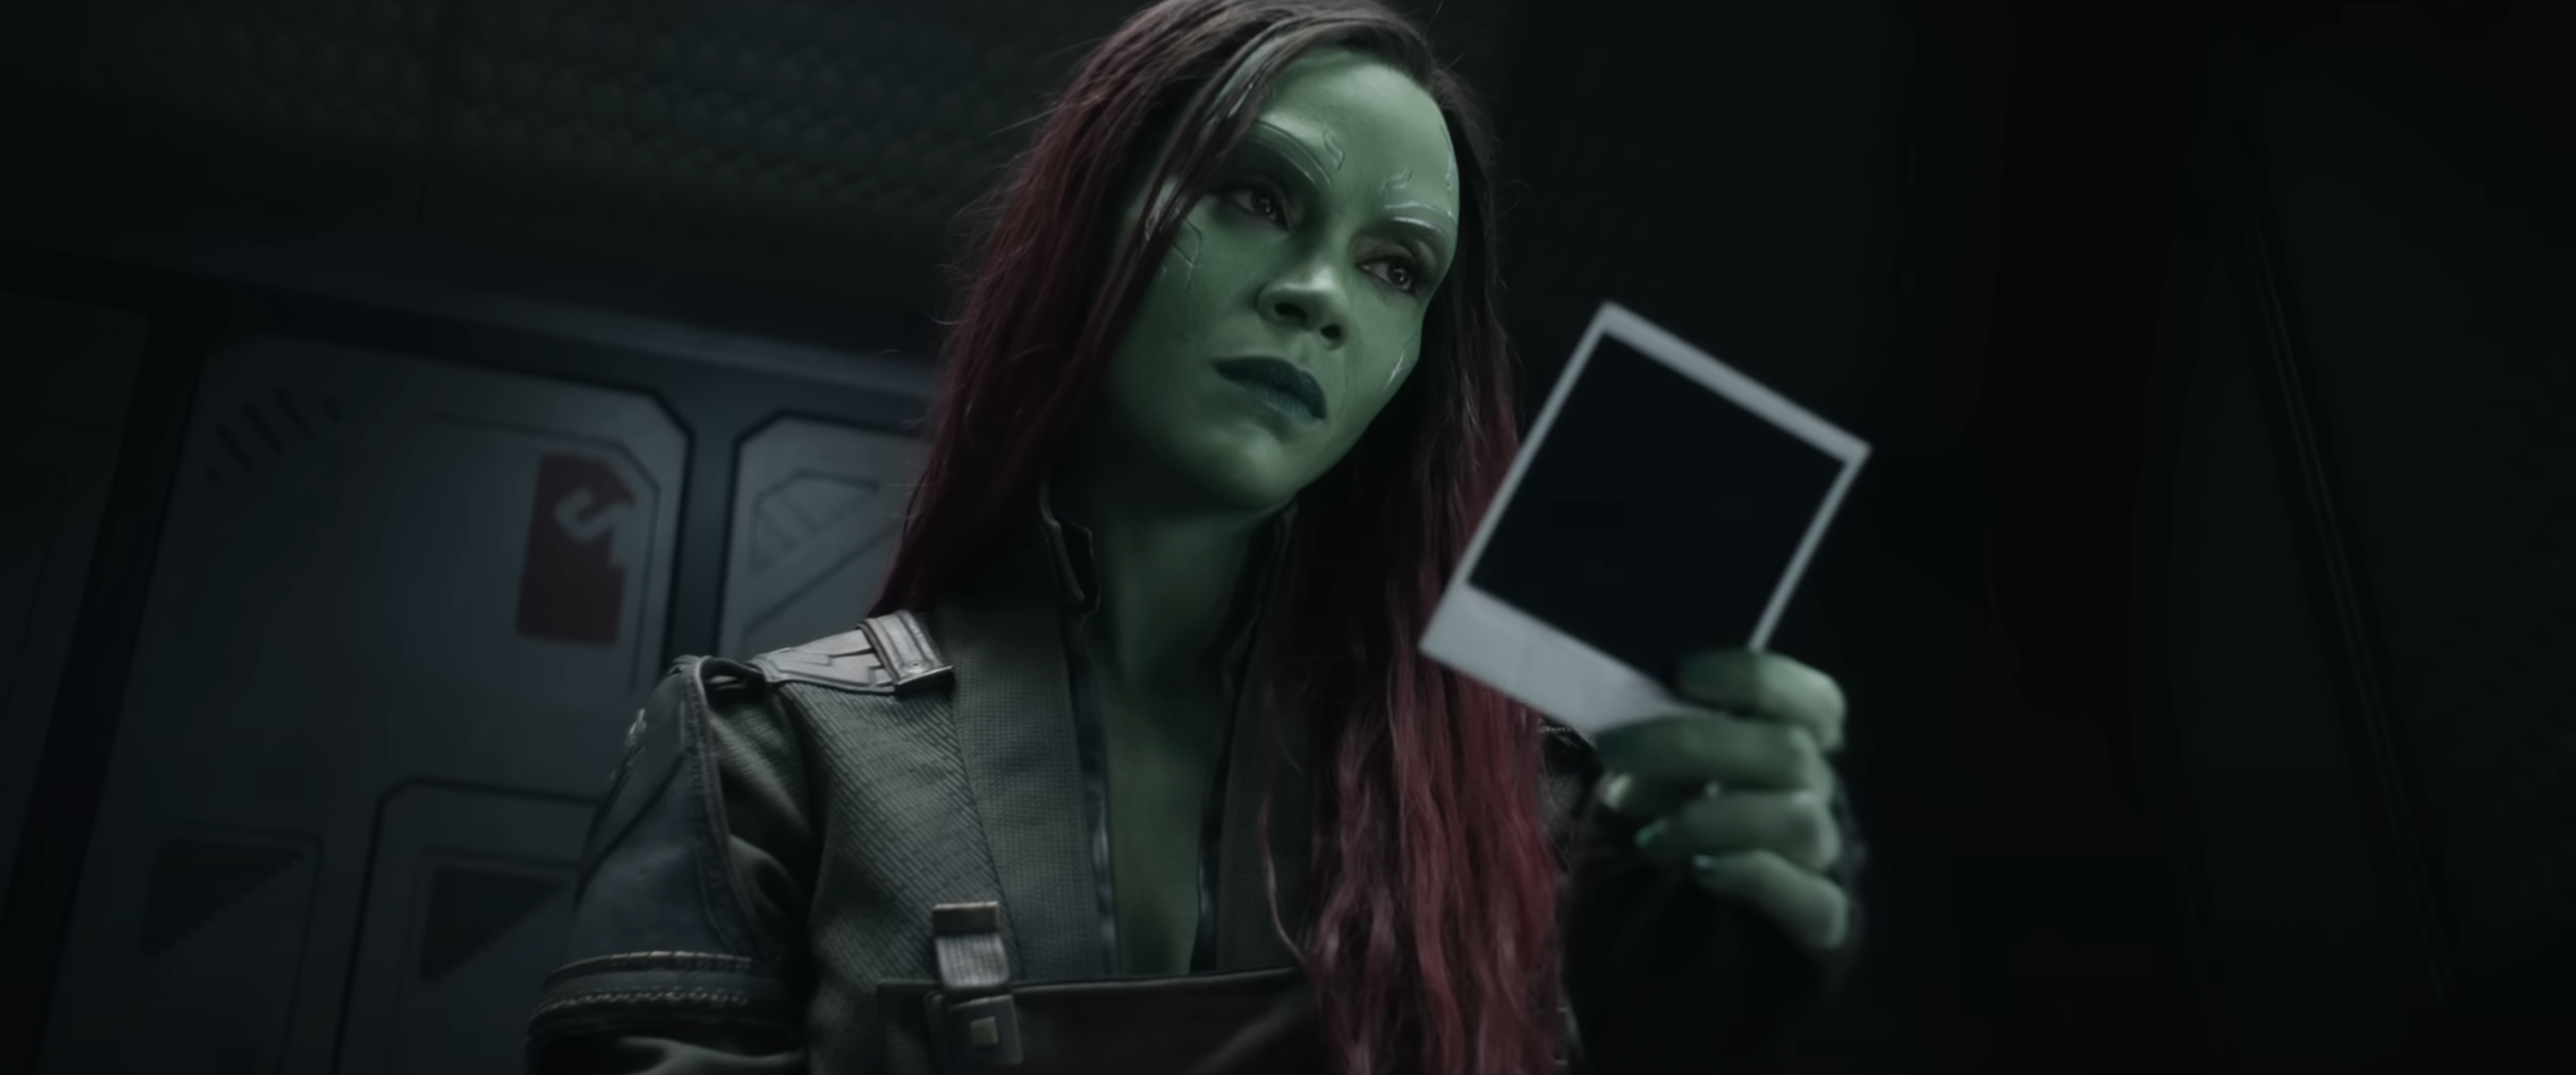 Everything We Saw in the New Guardians of the Galaxy Vol. 3 Trailer